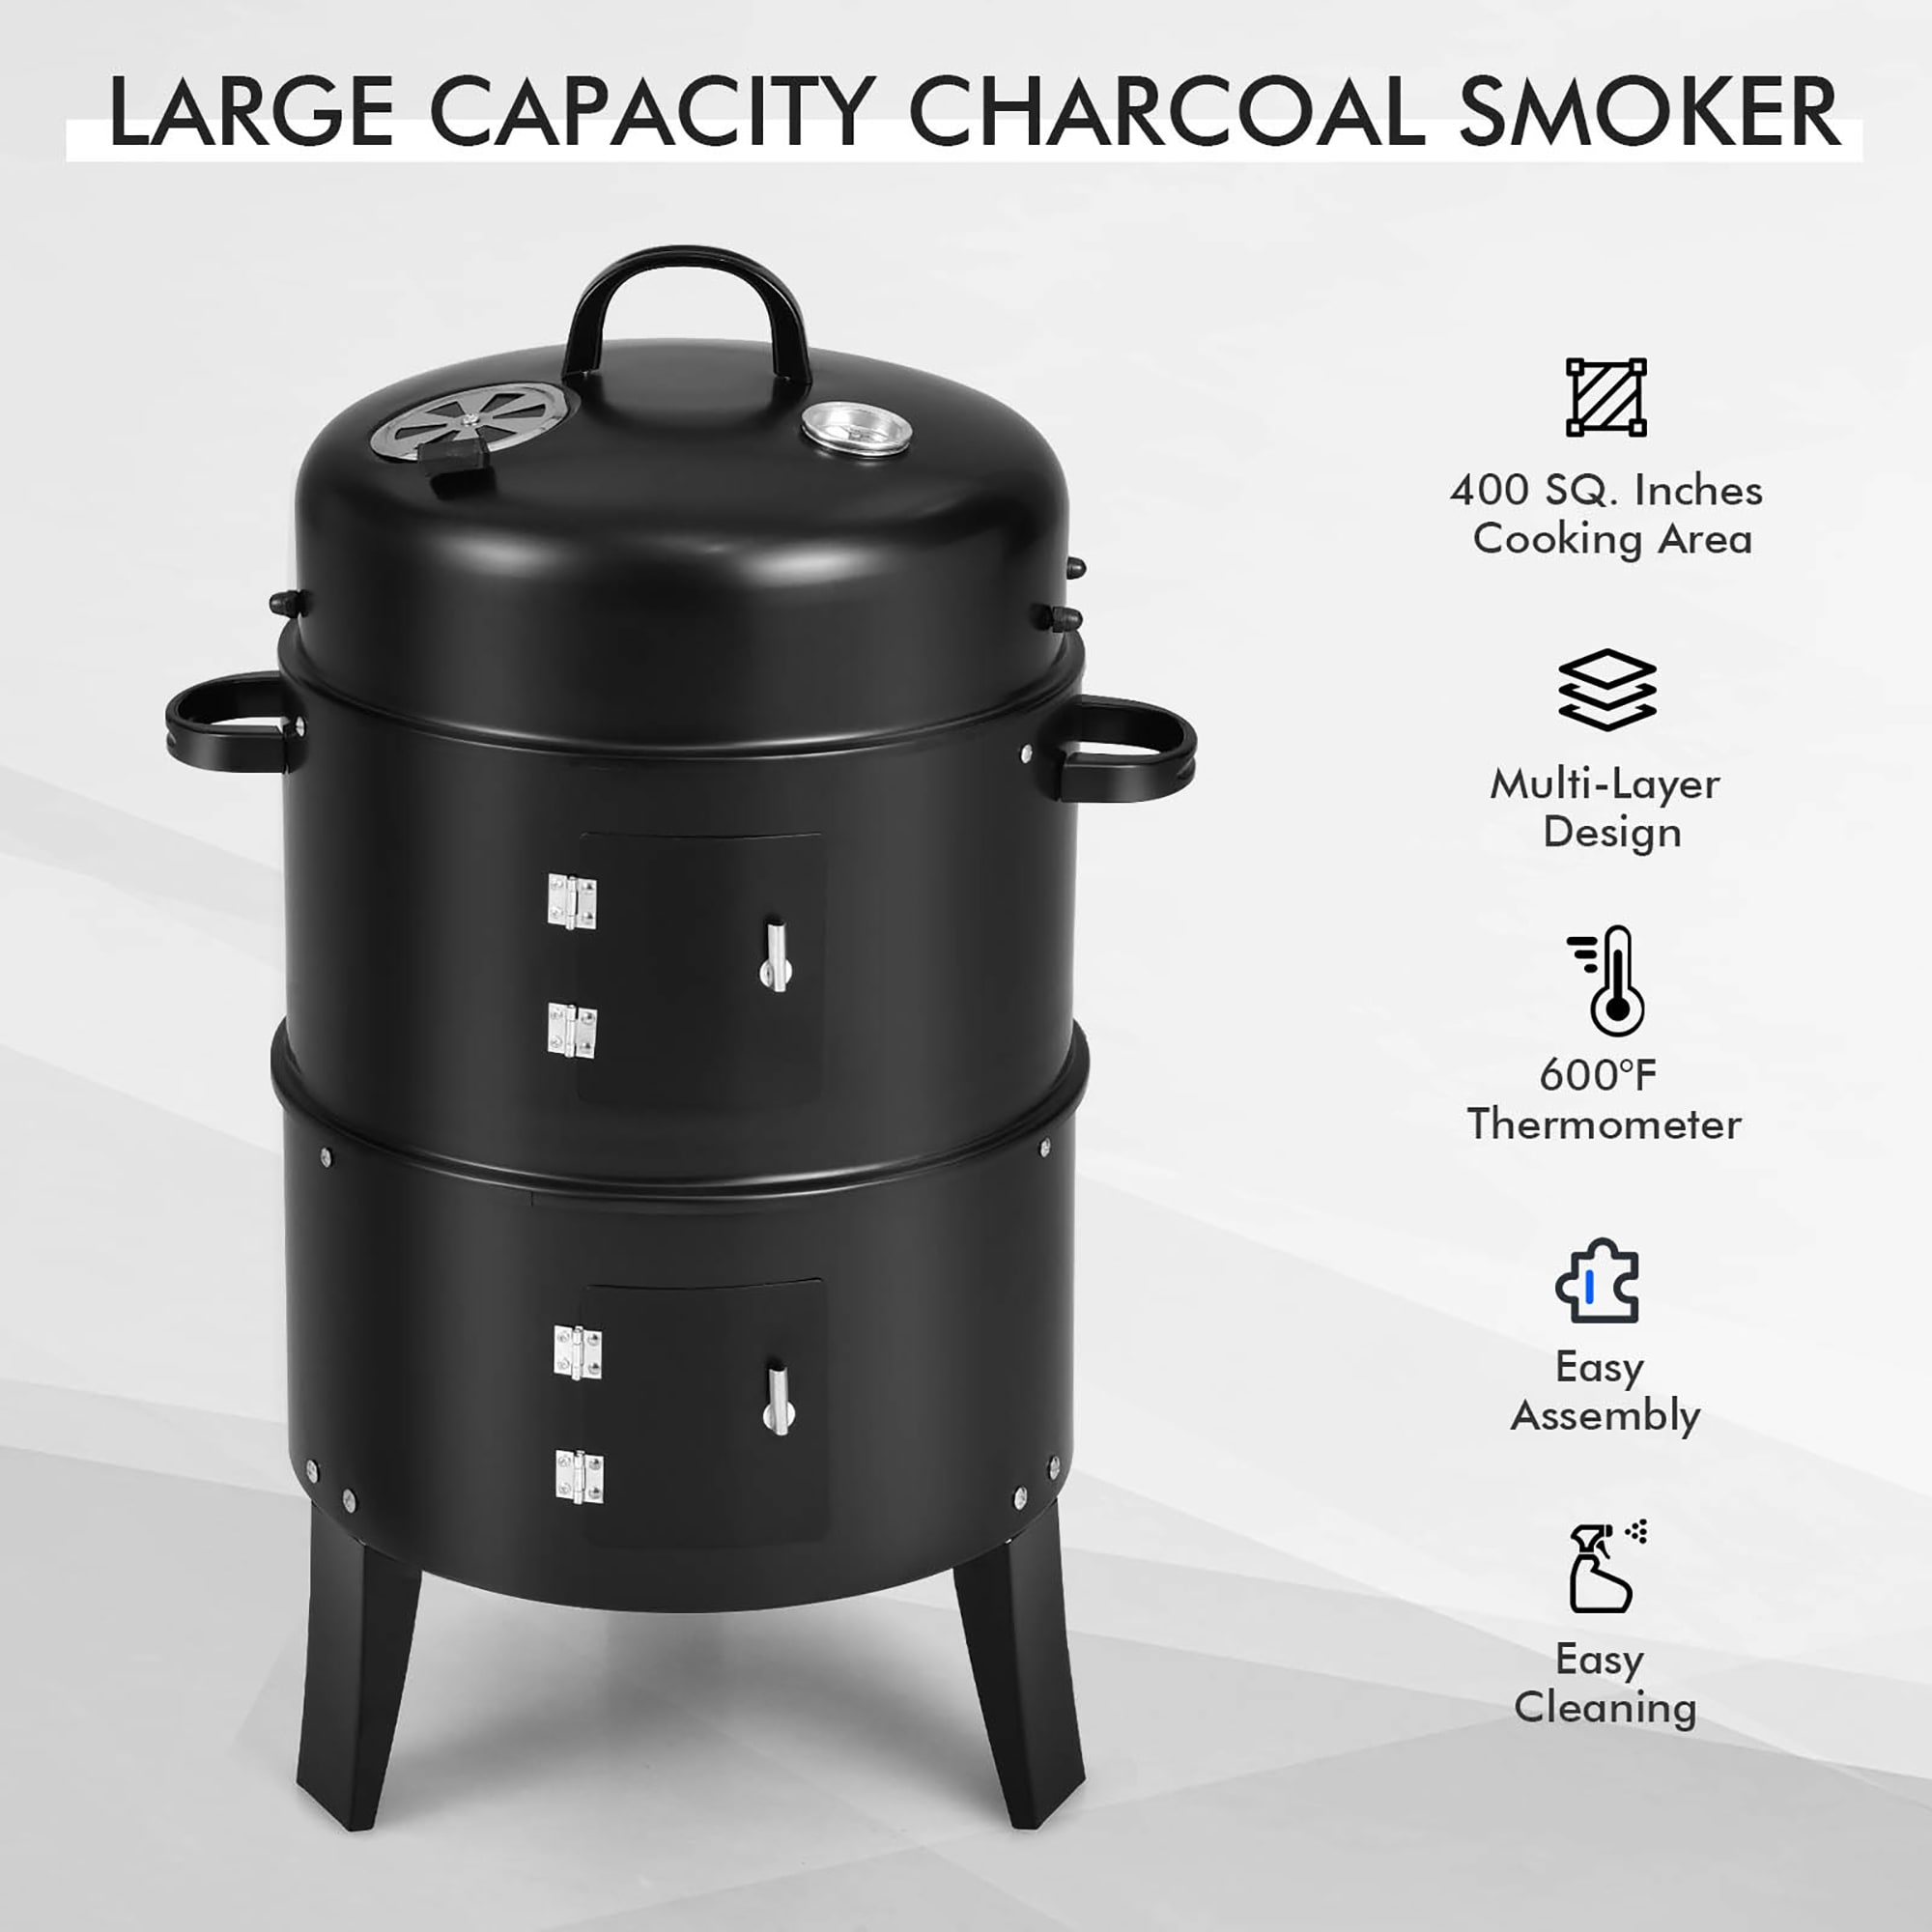 Costway3-in-1 Vertical Charcoal Smoker Portable BBQ Smoker Grill